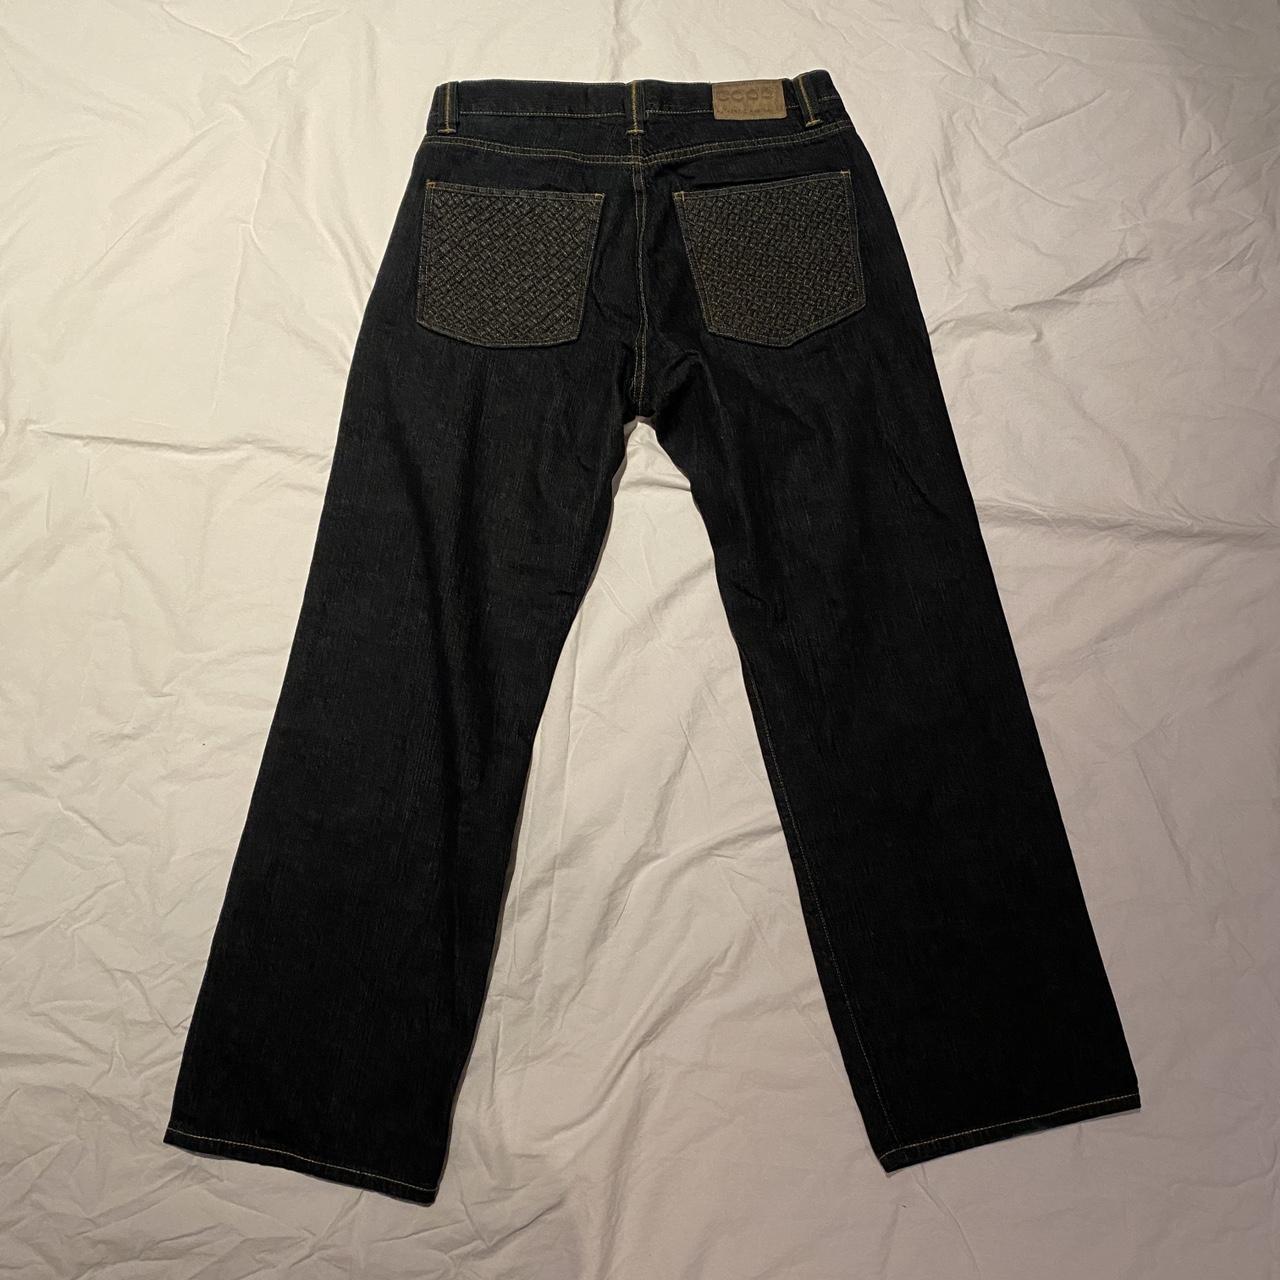 Coogi Men's Black and Navy Jeans